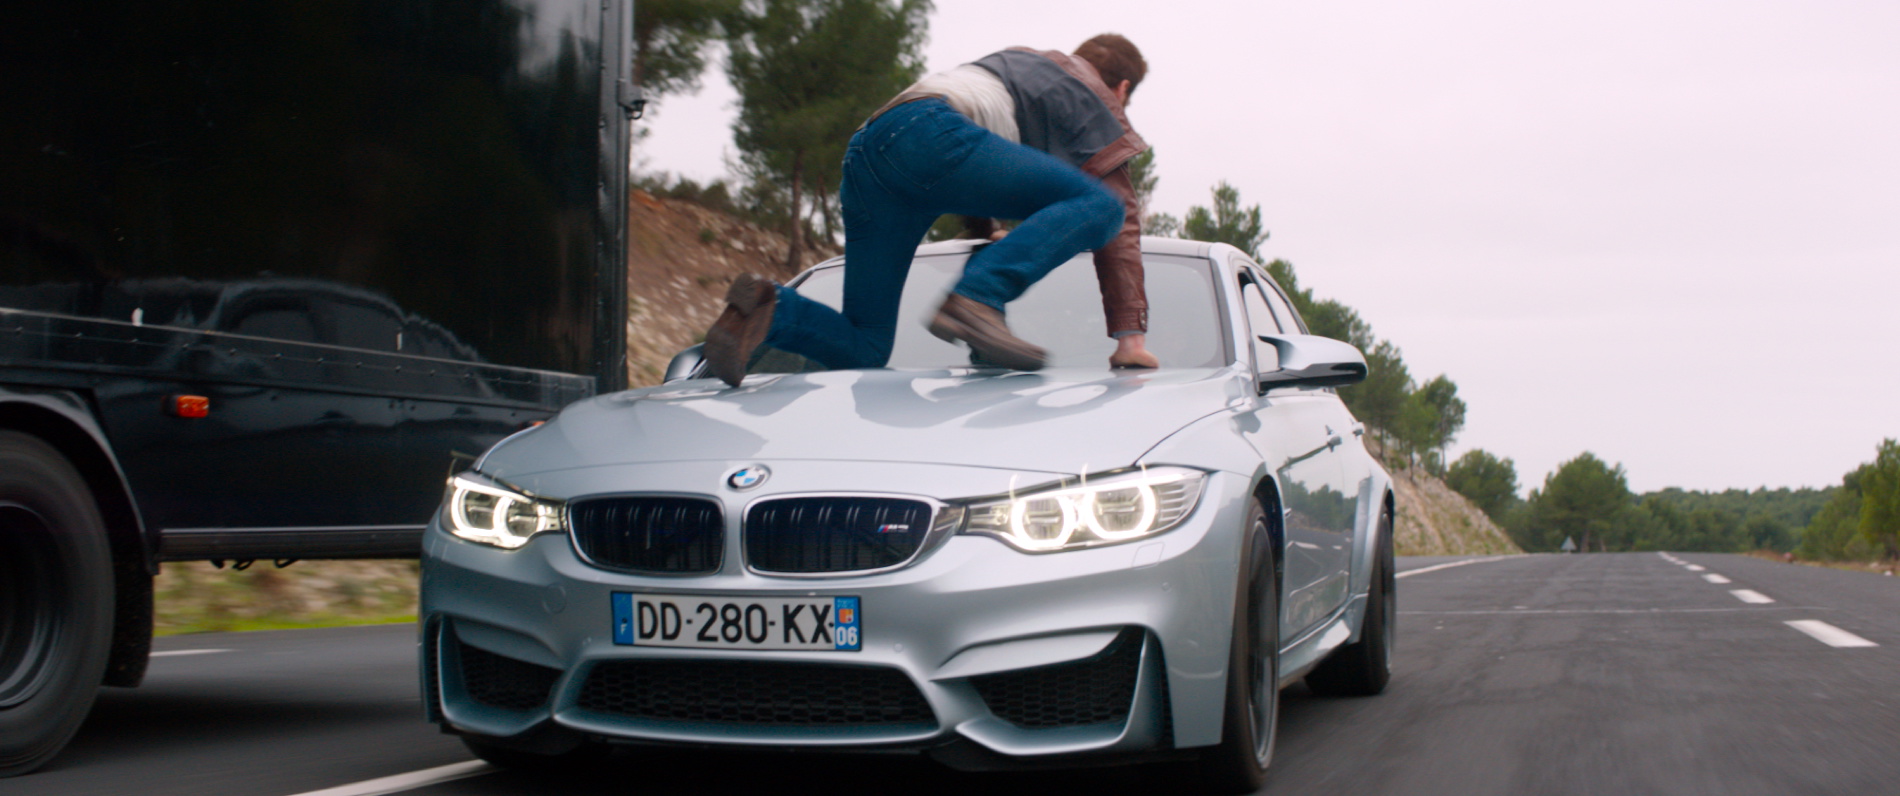 BMW Featured in Movie "Overdrive" with Scott Eastwood